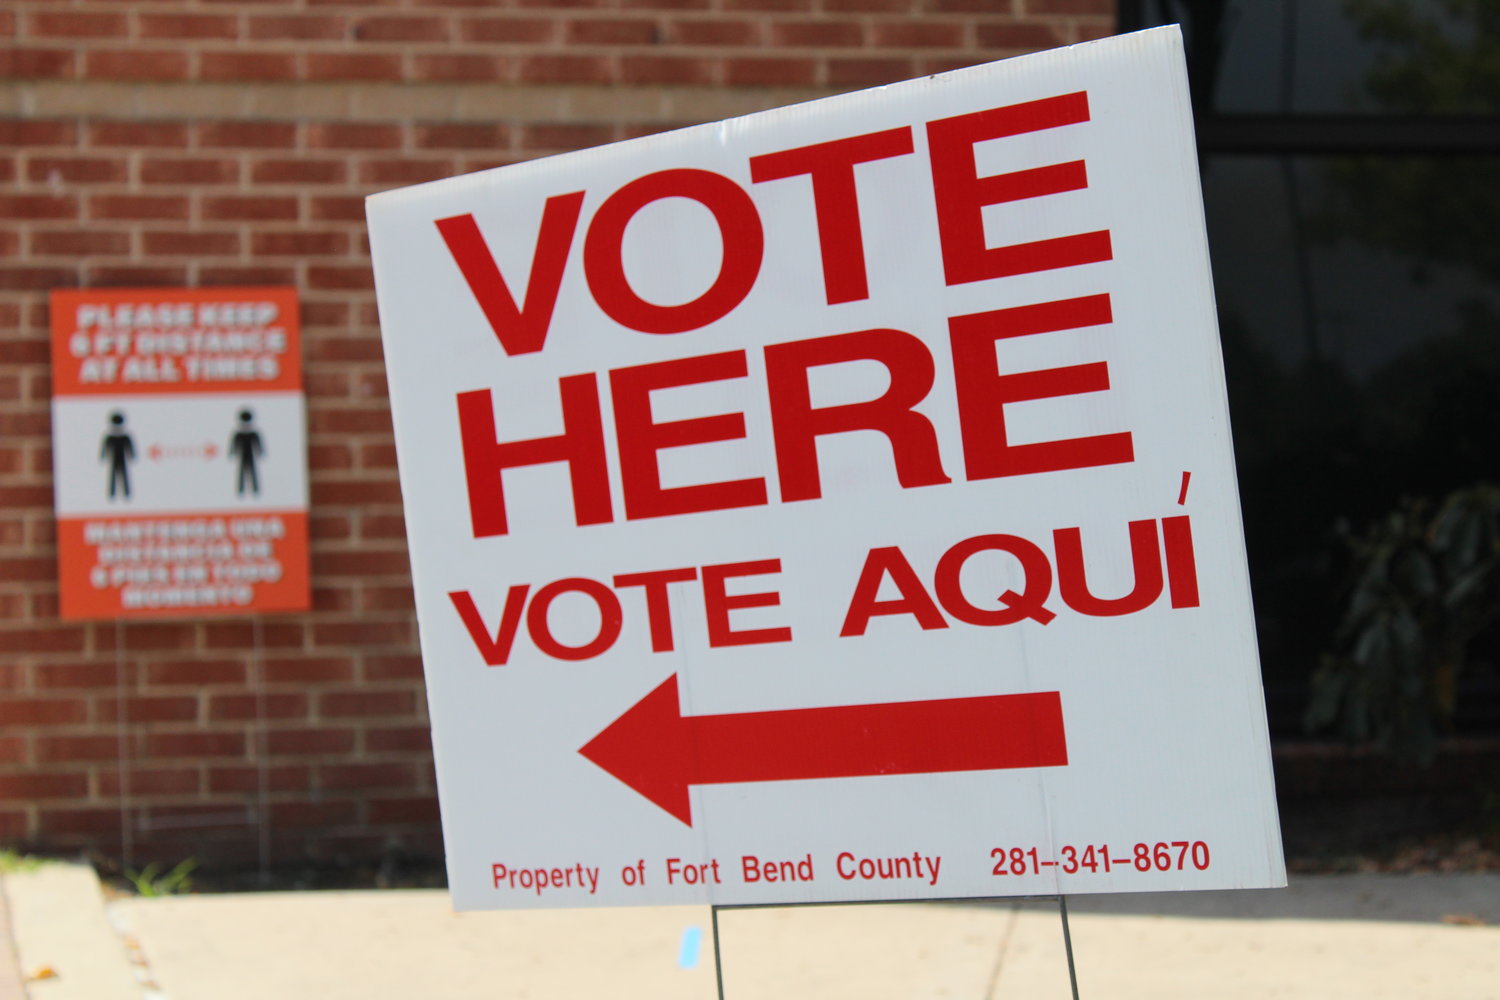 Katy area voters saw several elections that could change the political landscape of the area, including the race for Harris County Commissioner for Precinct 3, a position which has been held by Steve Radack since 1988.